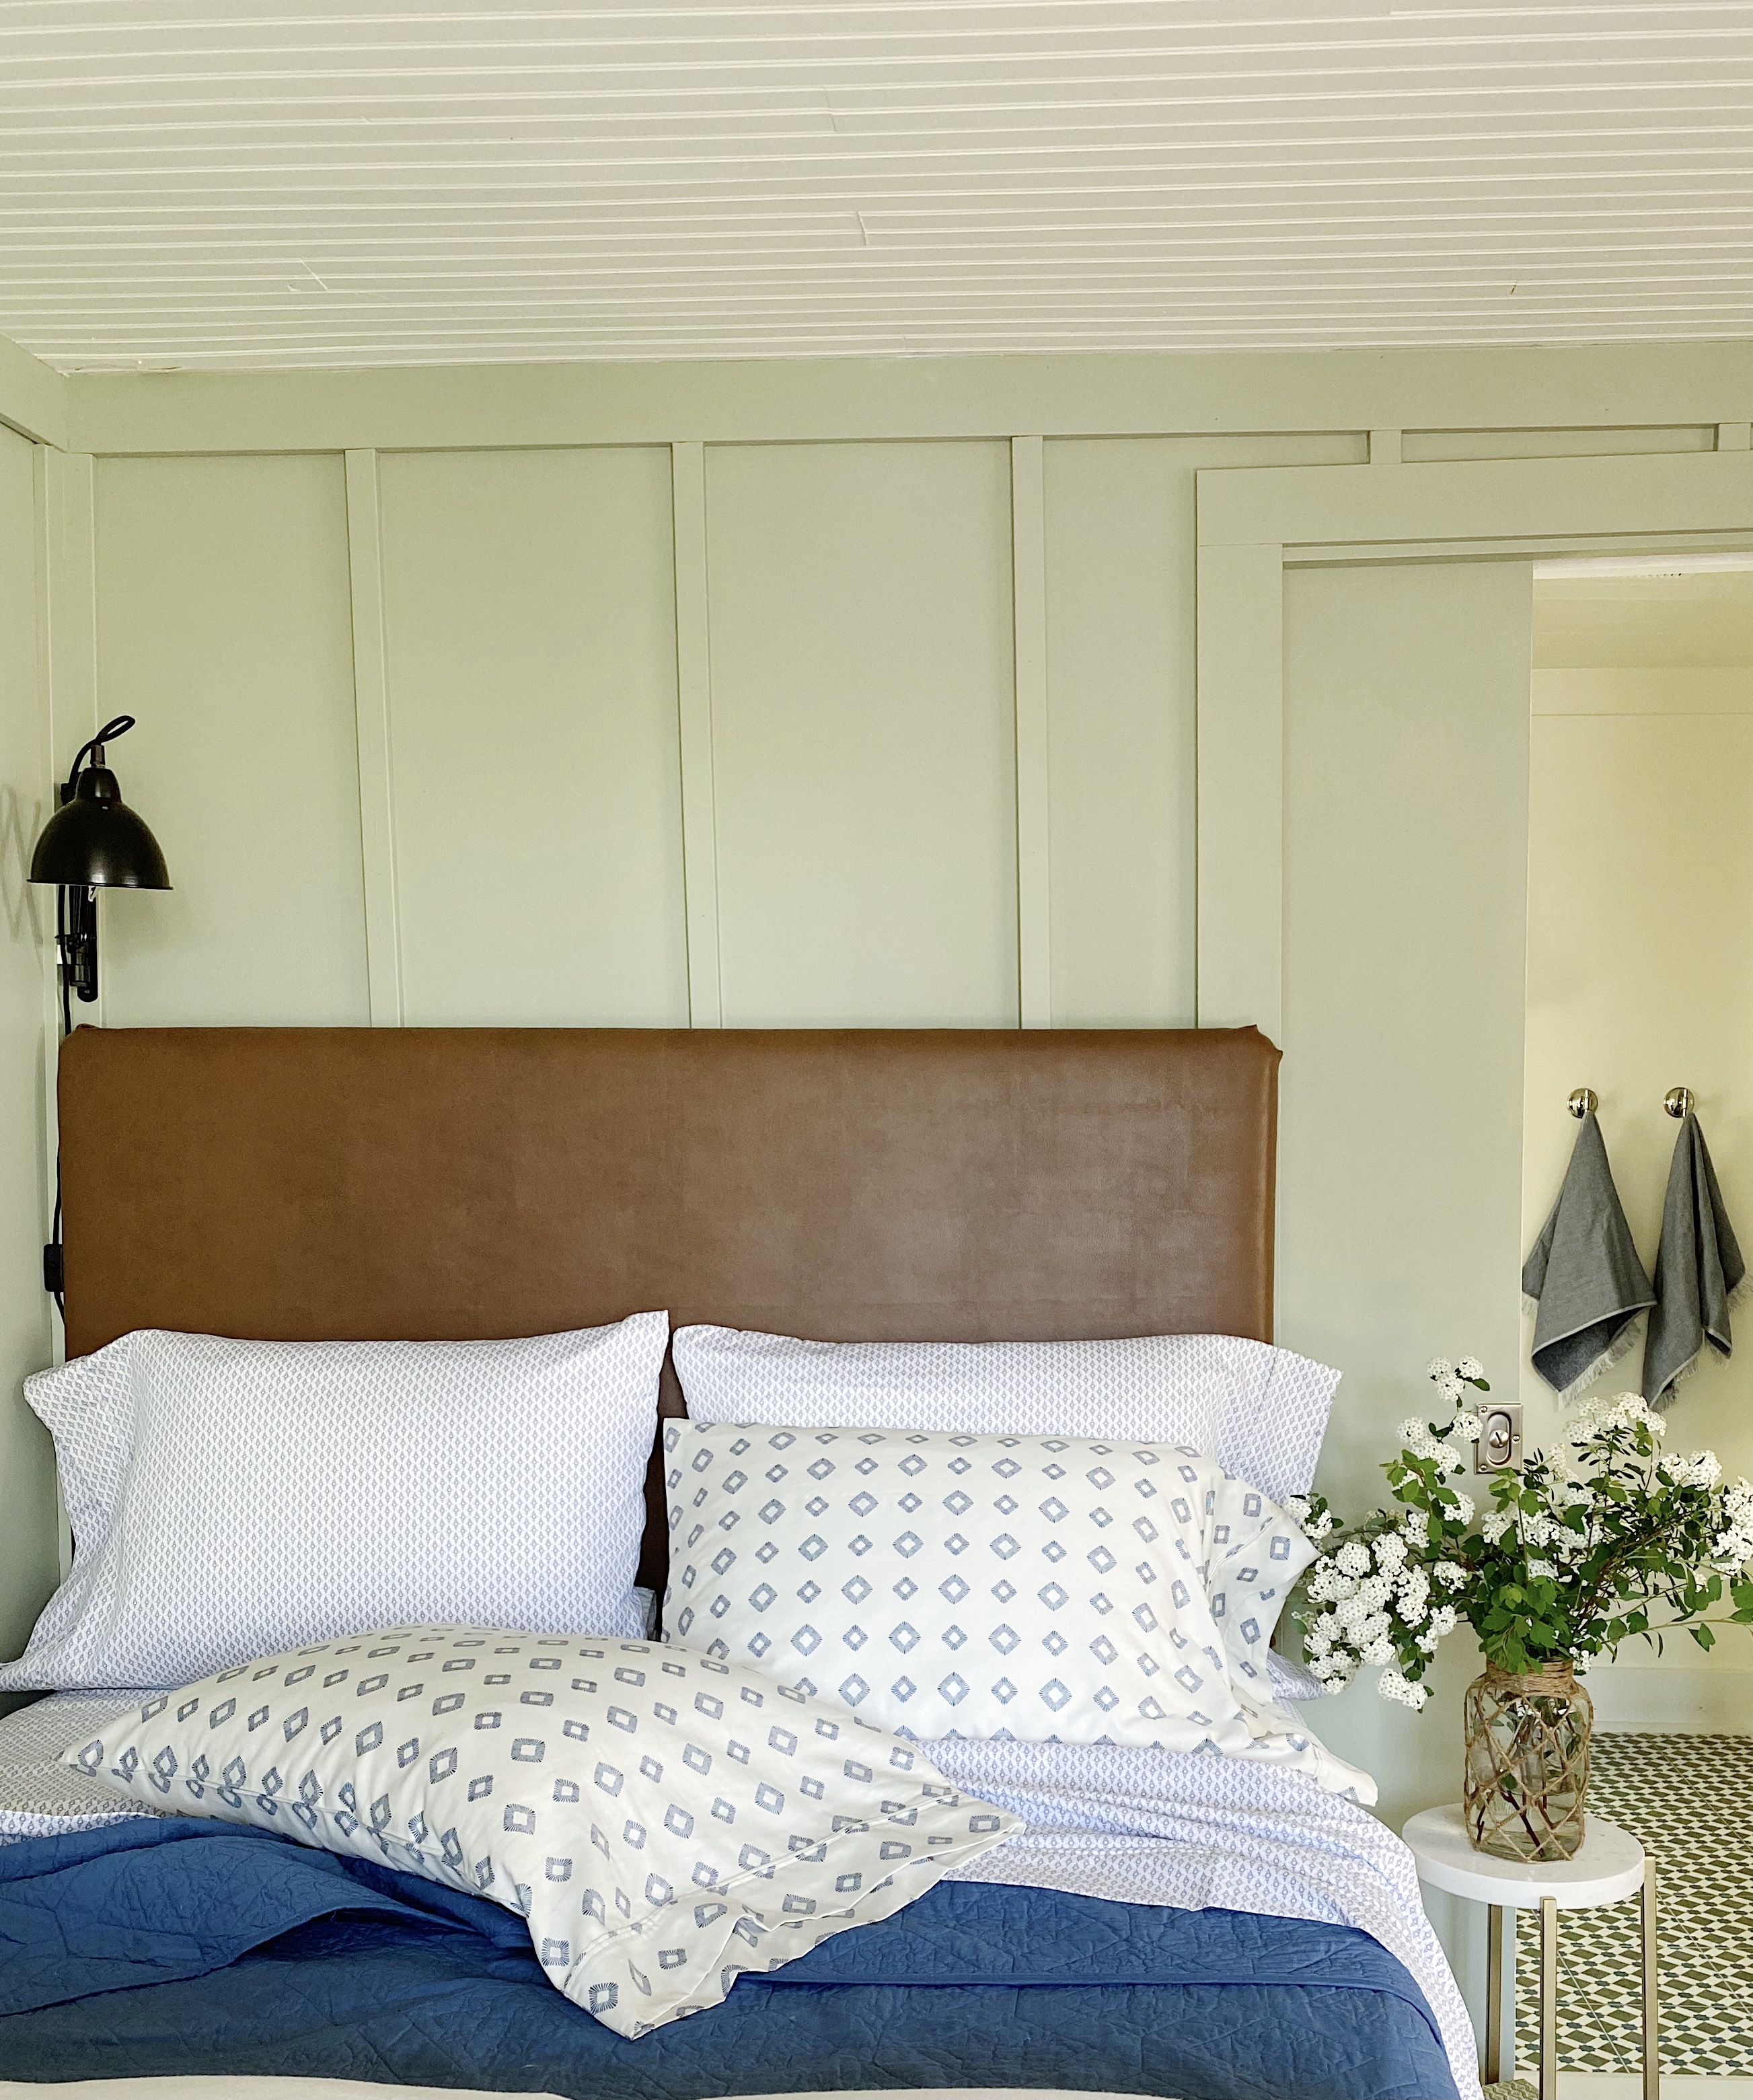 bed with leather headboard in front of green board and batten wall